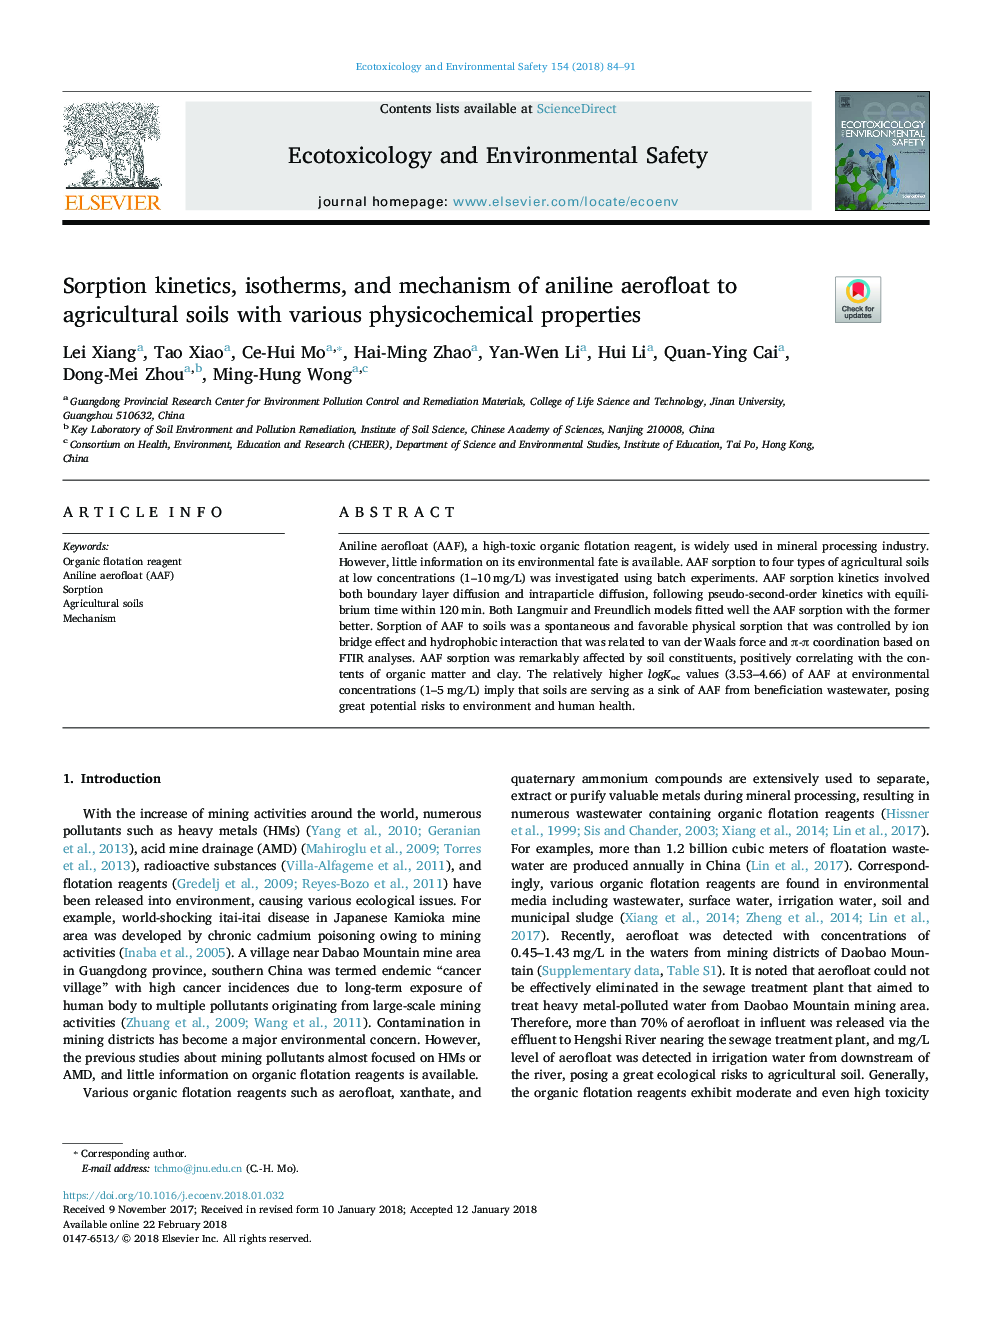 Sorption kinetics, isotherms, and mechanism of aniline aerofloat to agricultural soils with various physicochemical properties